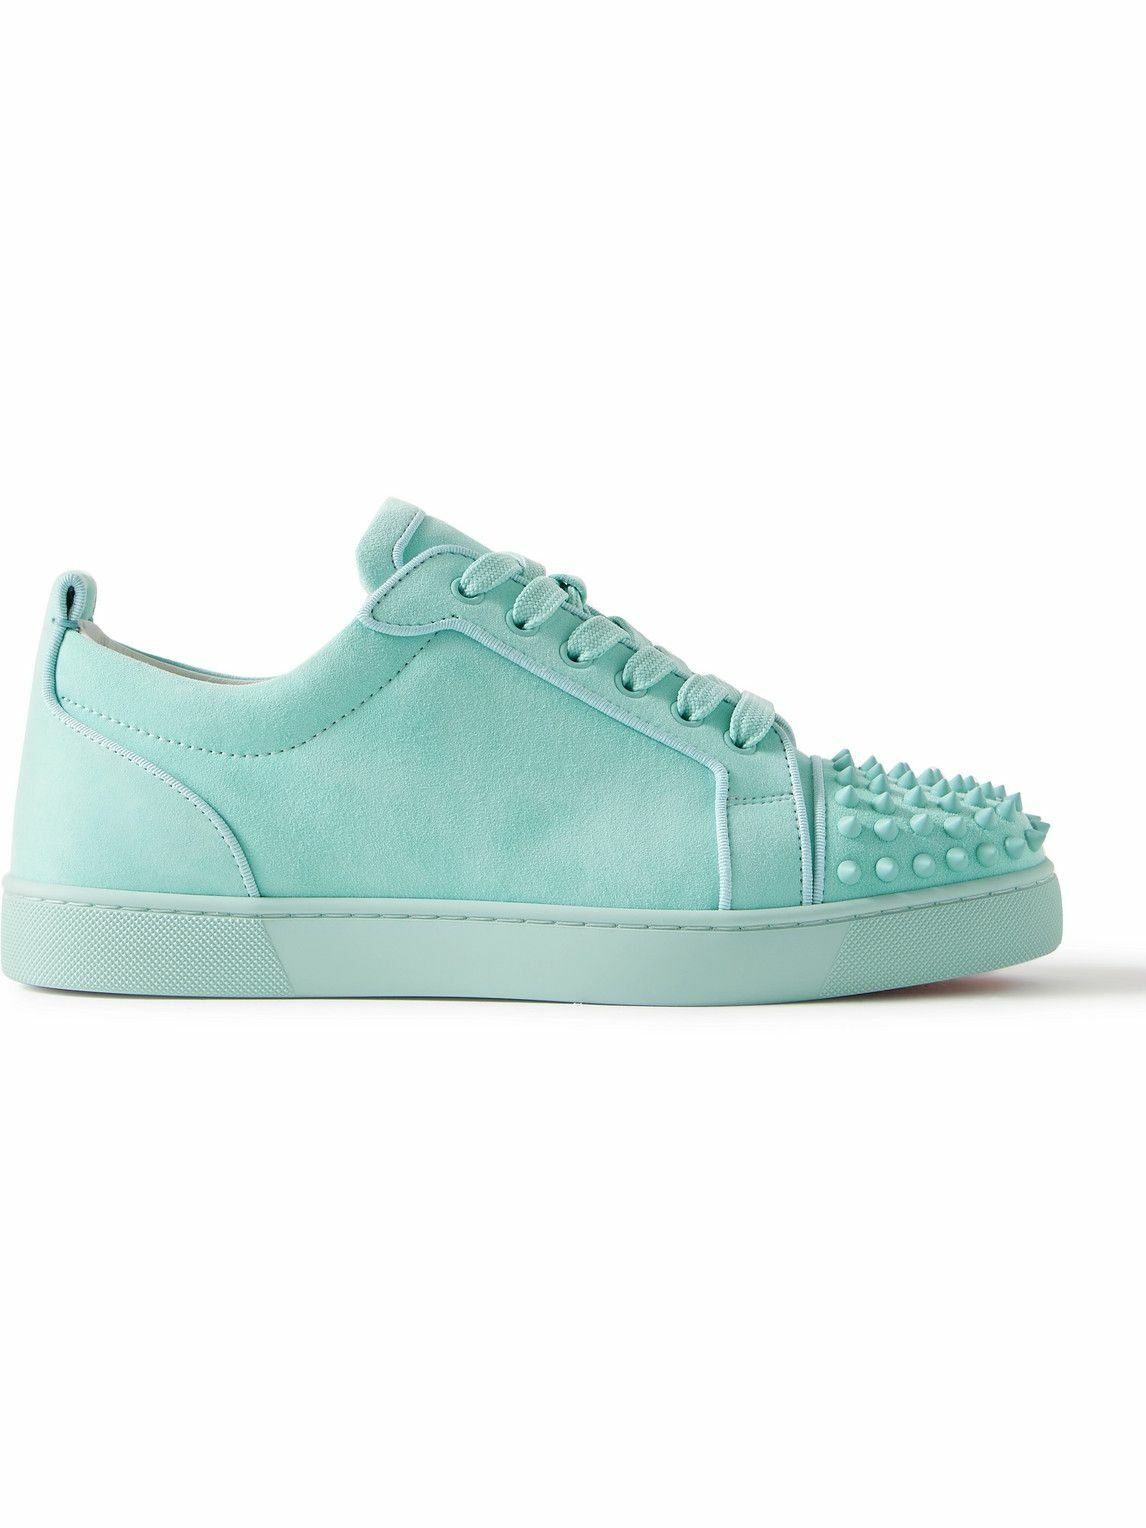 Photo: Christian Louboutin - Louis Junior Spiked Suede Sneakers - Blue